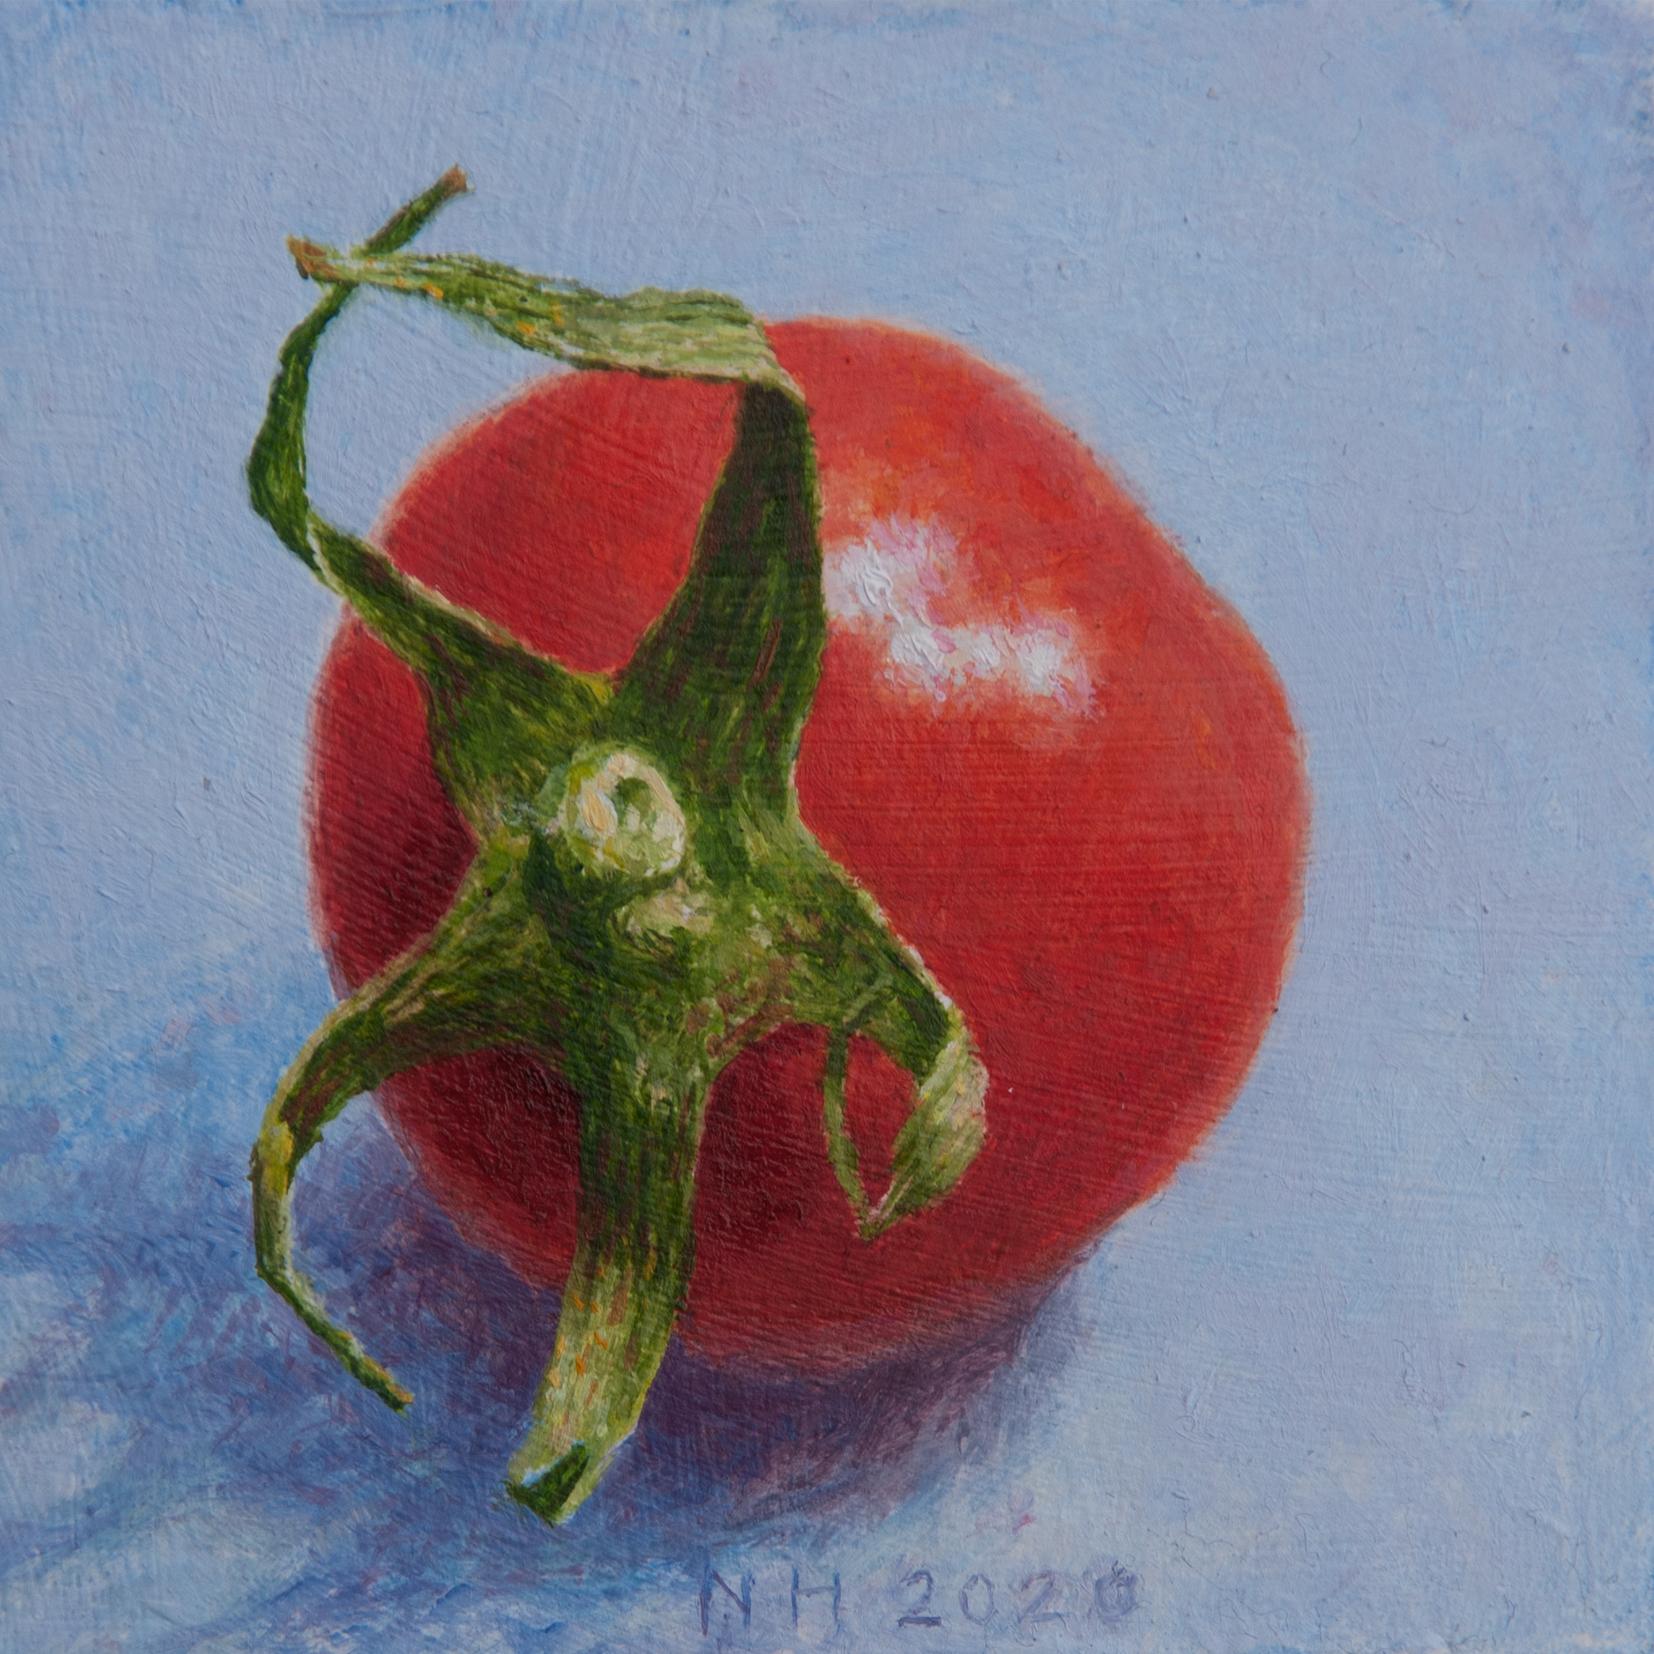 Nico Heilijgers Figurative Painting - ''Tomato'' Contemporary Dutch Miniature Still Life Painting of a Cherry Tomato